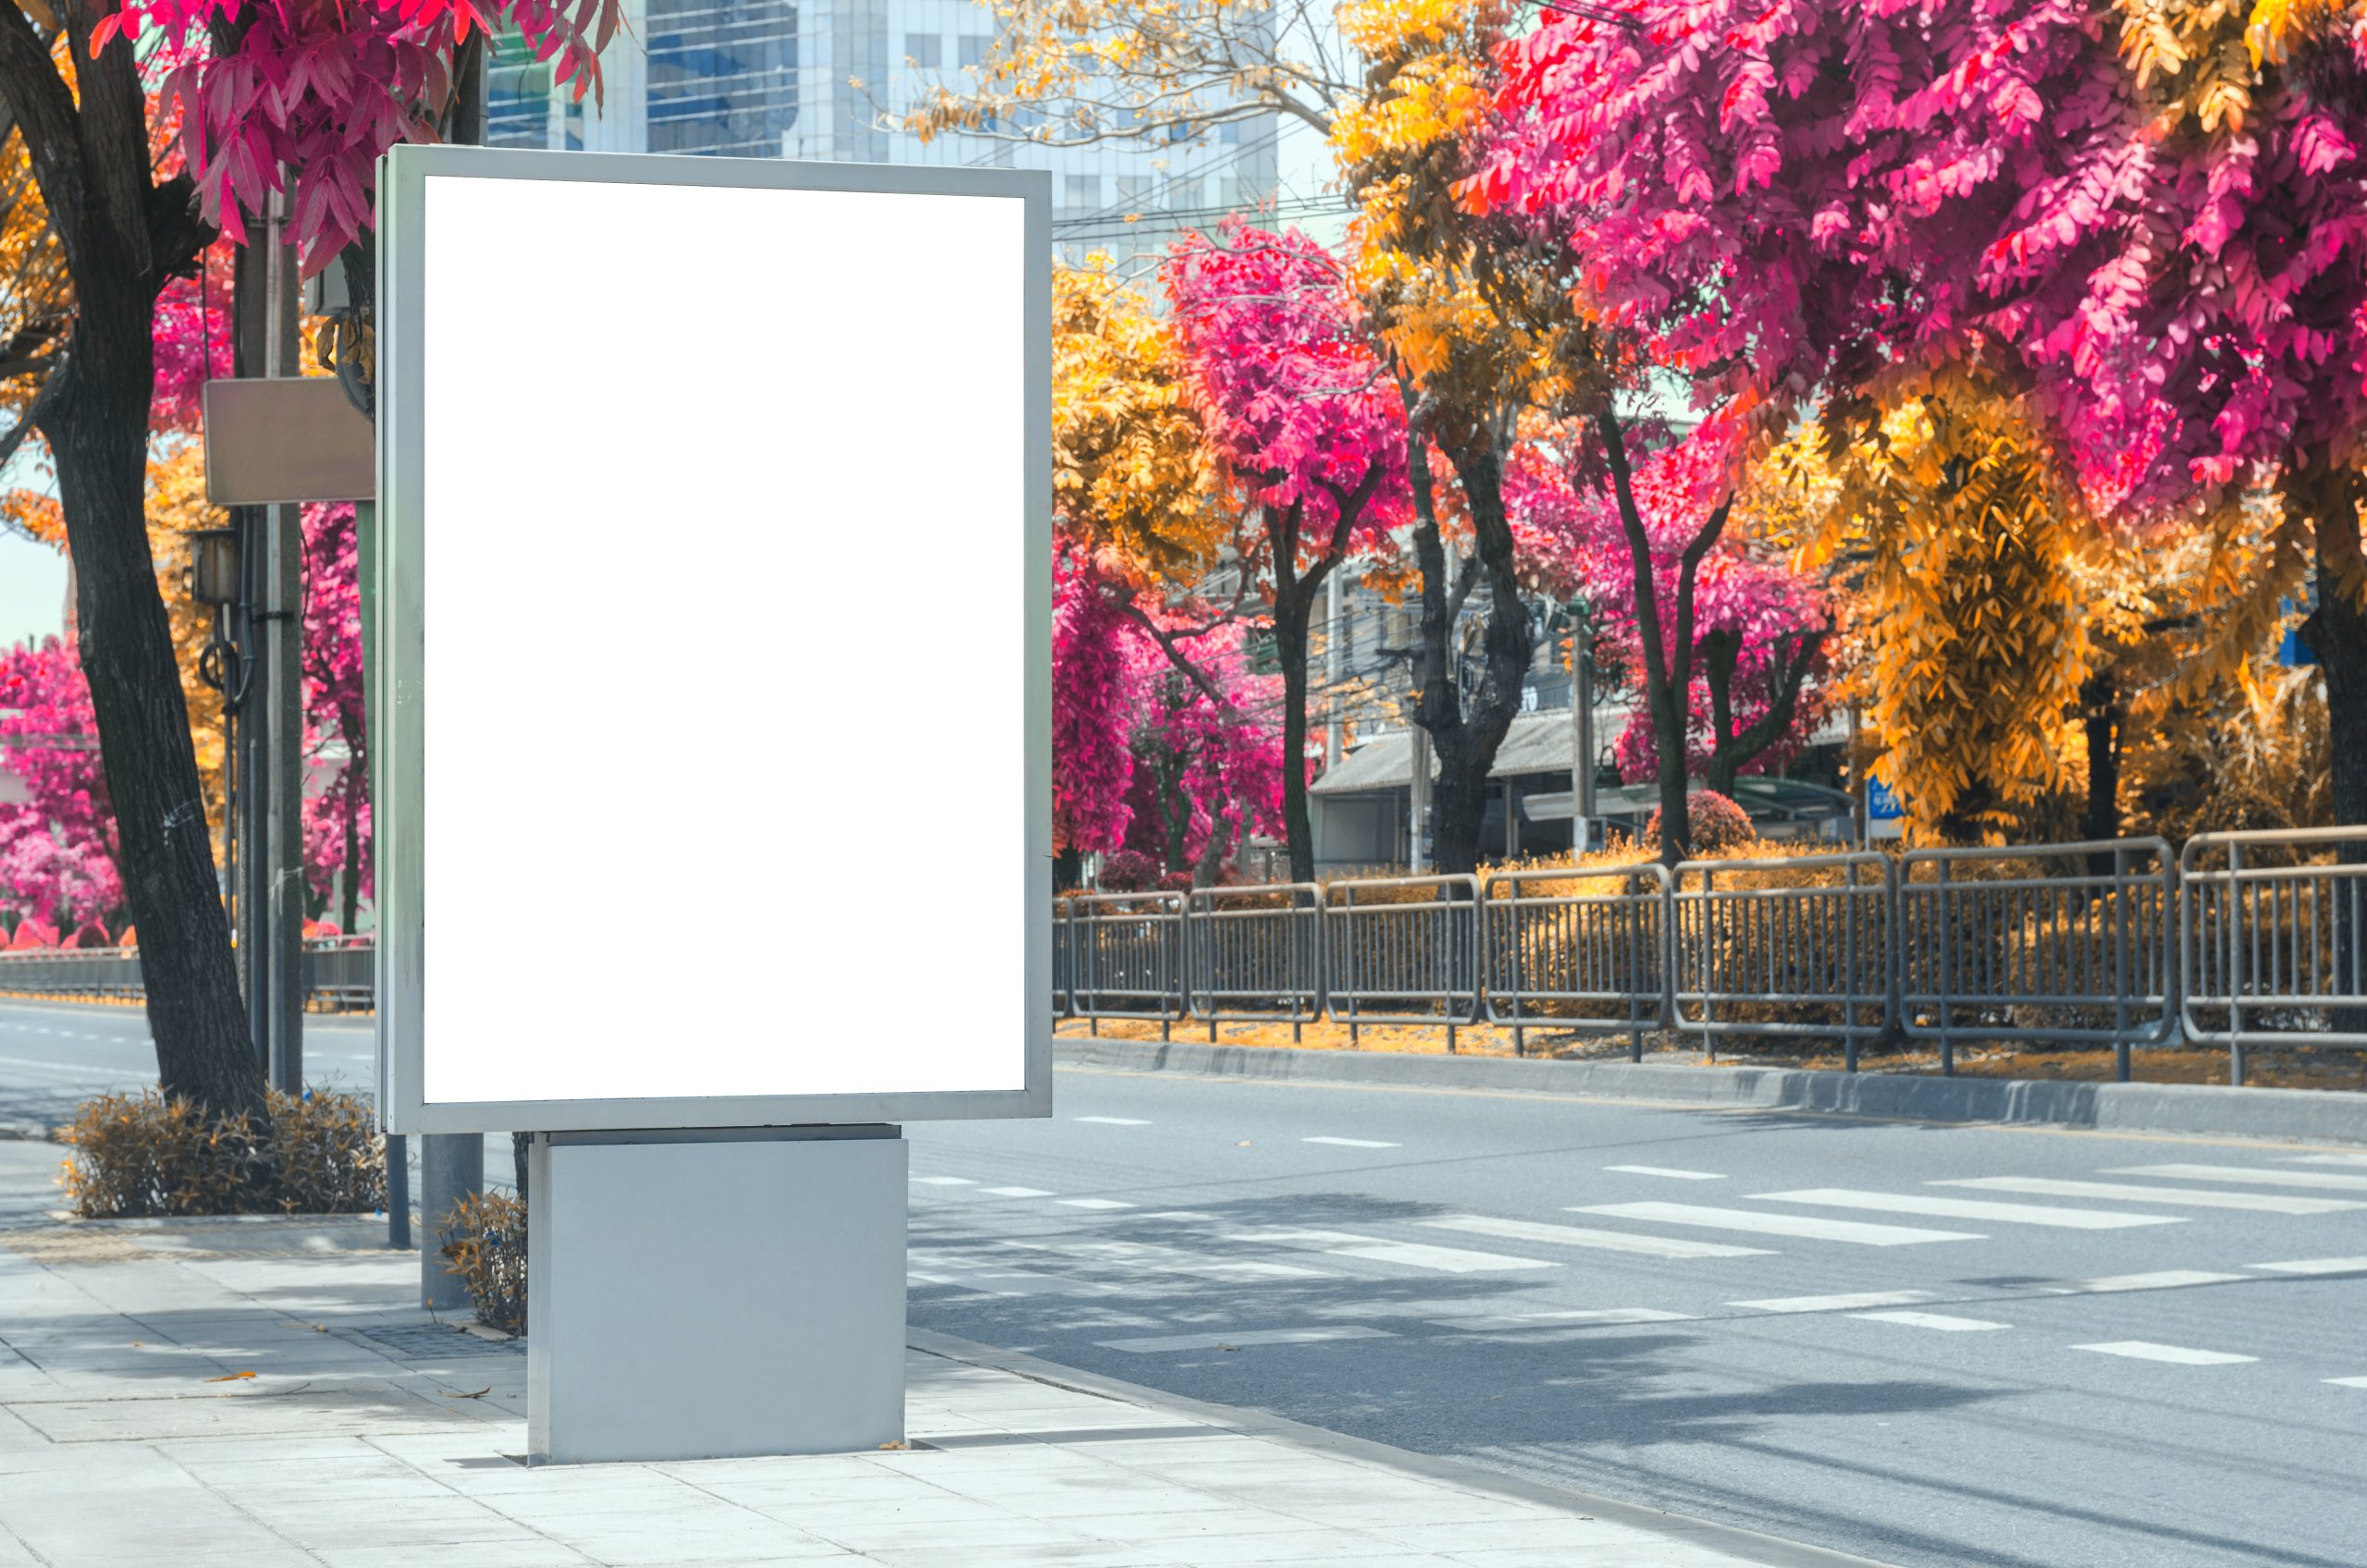 blank billboard white led screen vertical outstanding on pathway side the road. mock up board for display advertisement text template promotion new branding at outdoor with colorful autumn leaves.